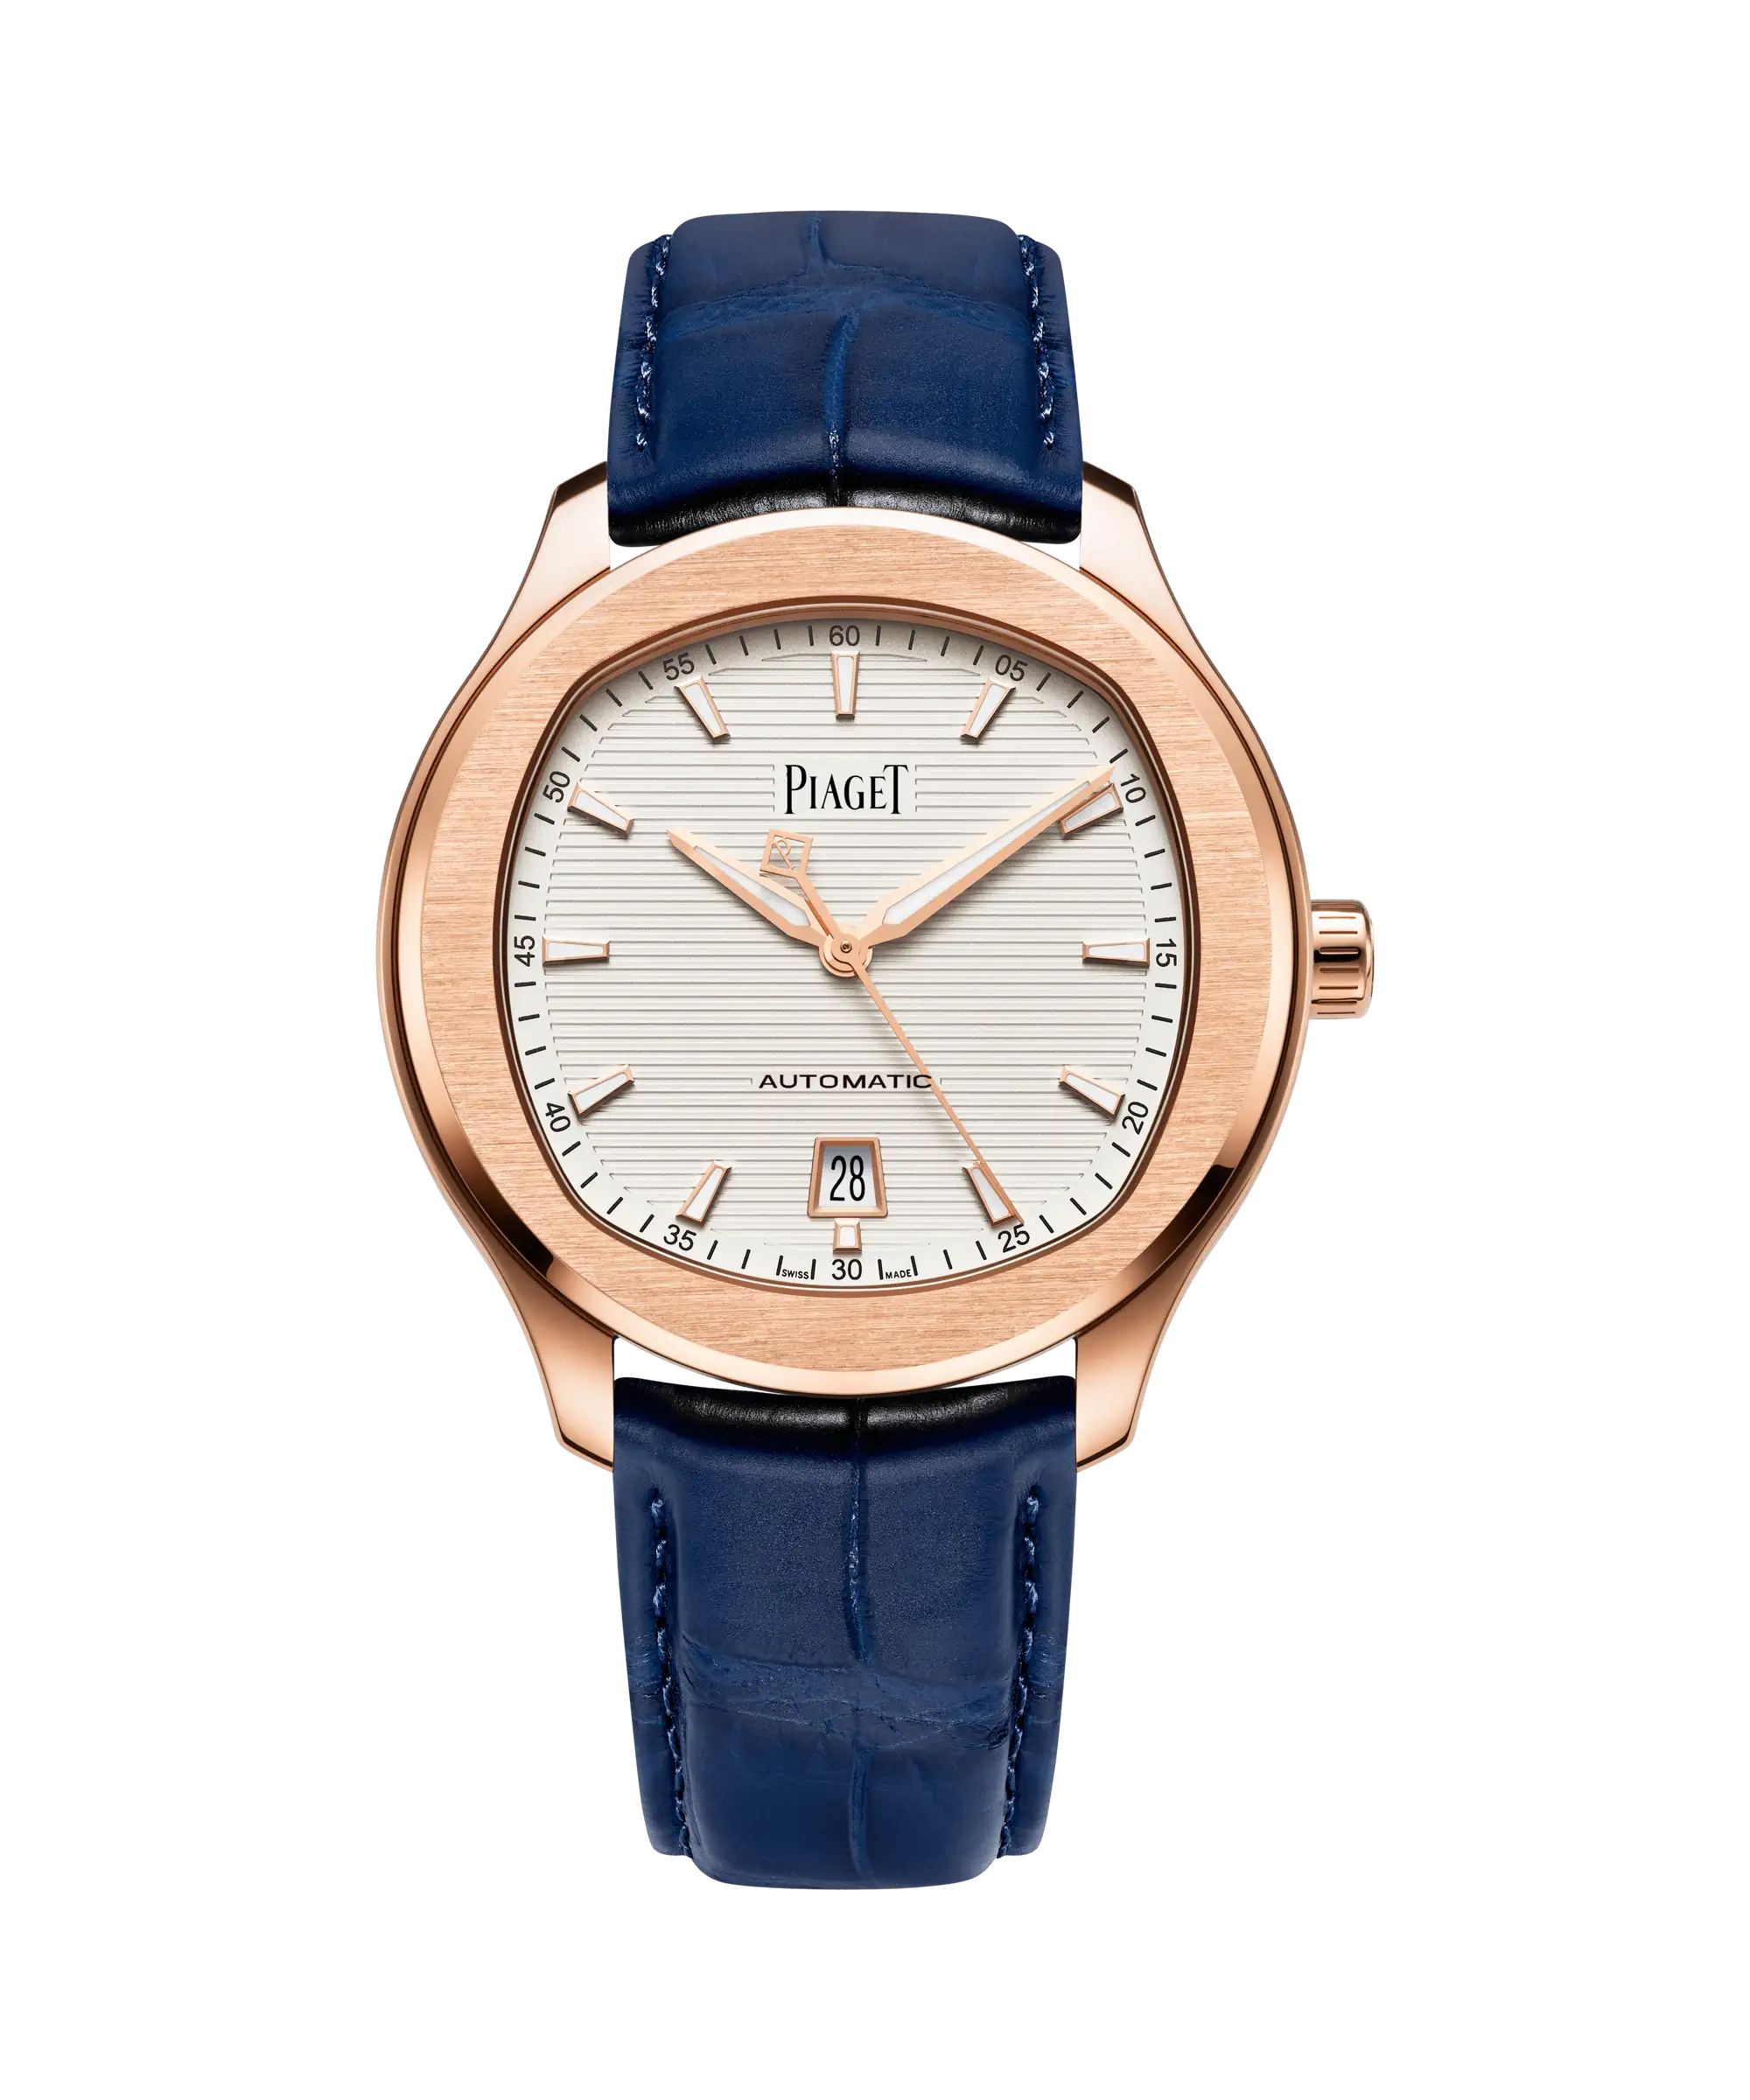 Piaget Polo S-exchage-image